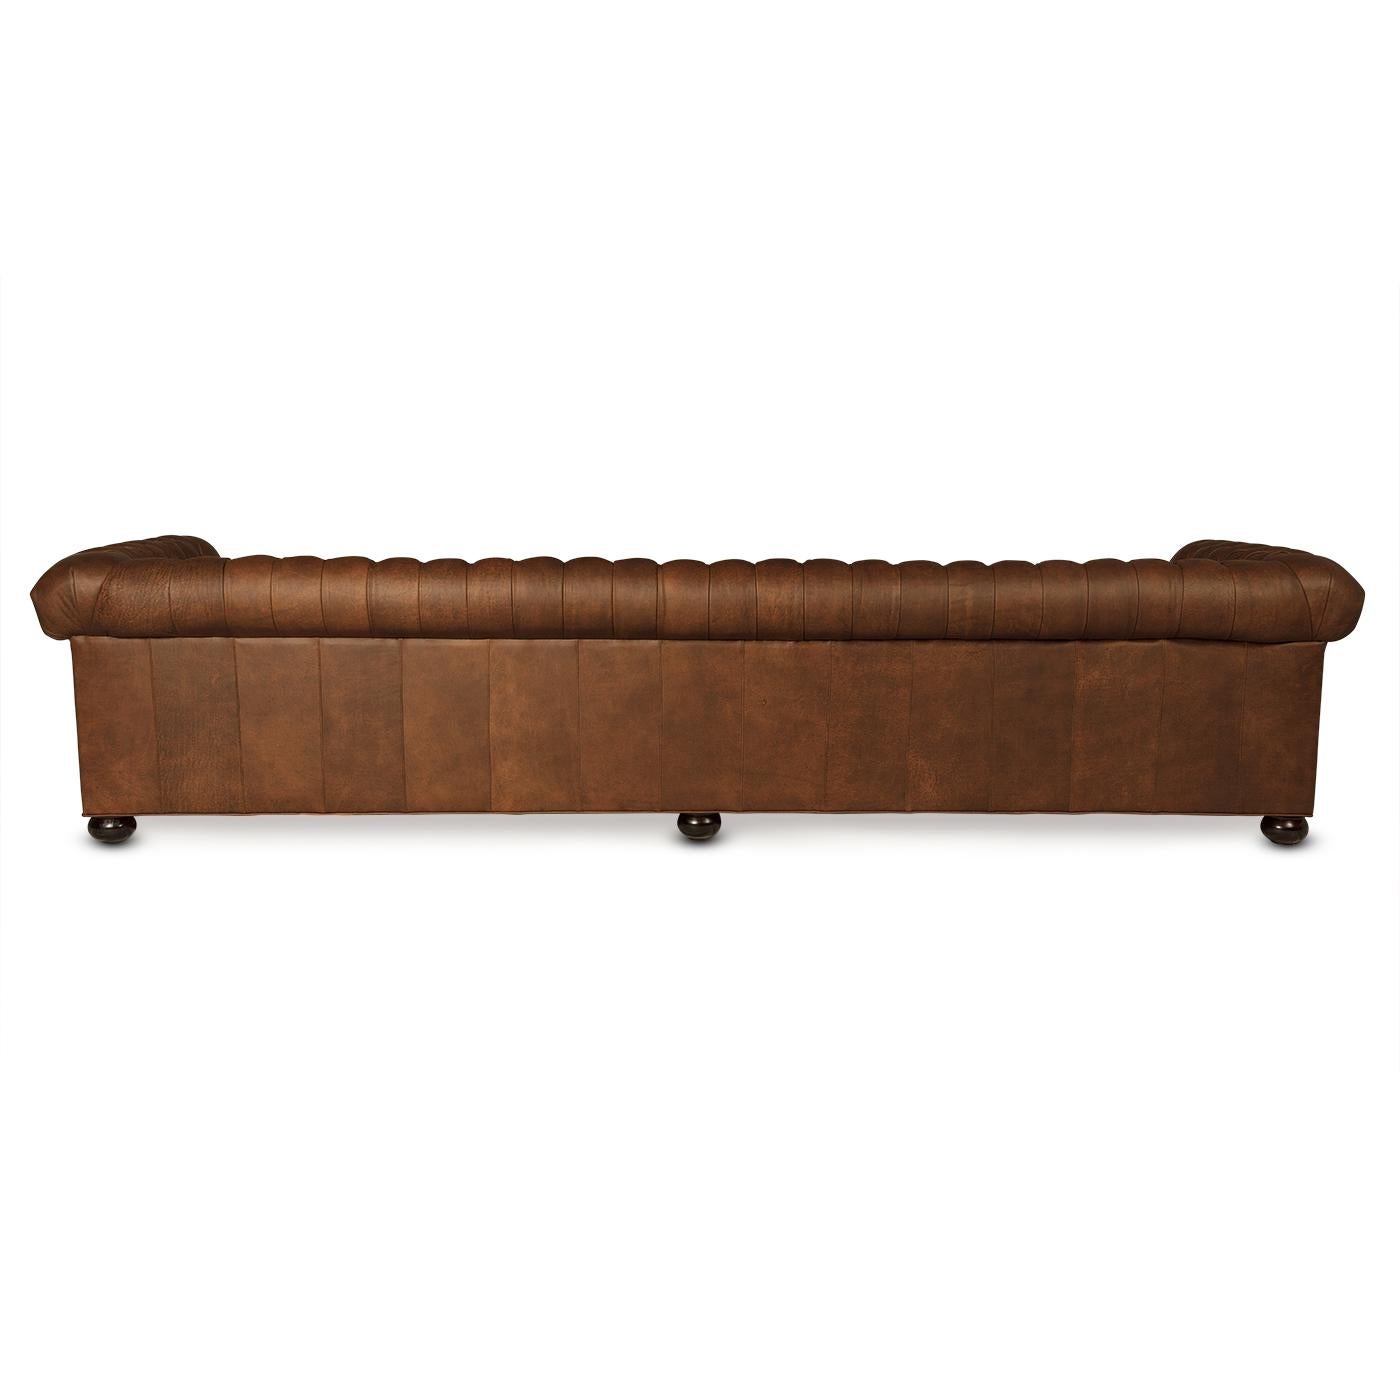 American Leather 4 Seater Chesterfield Sofa For Sale